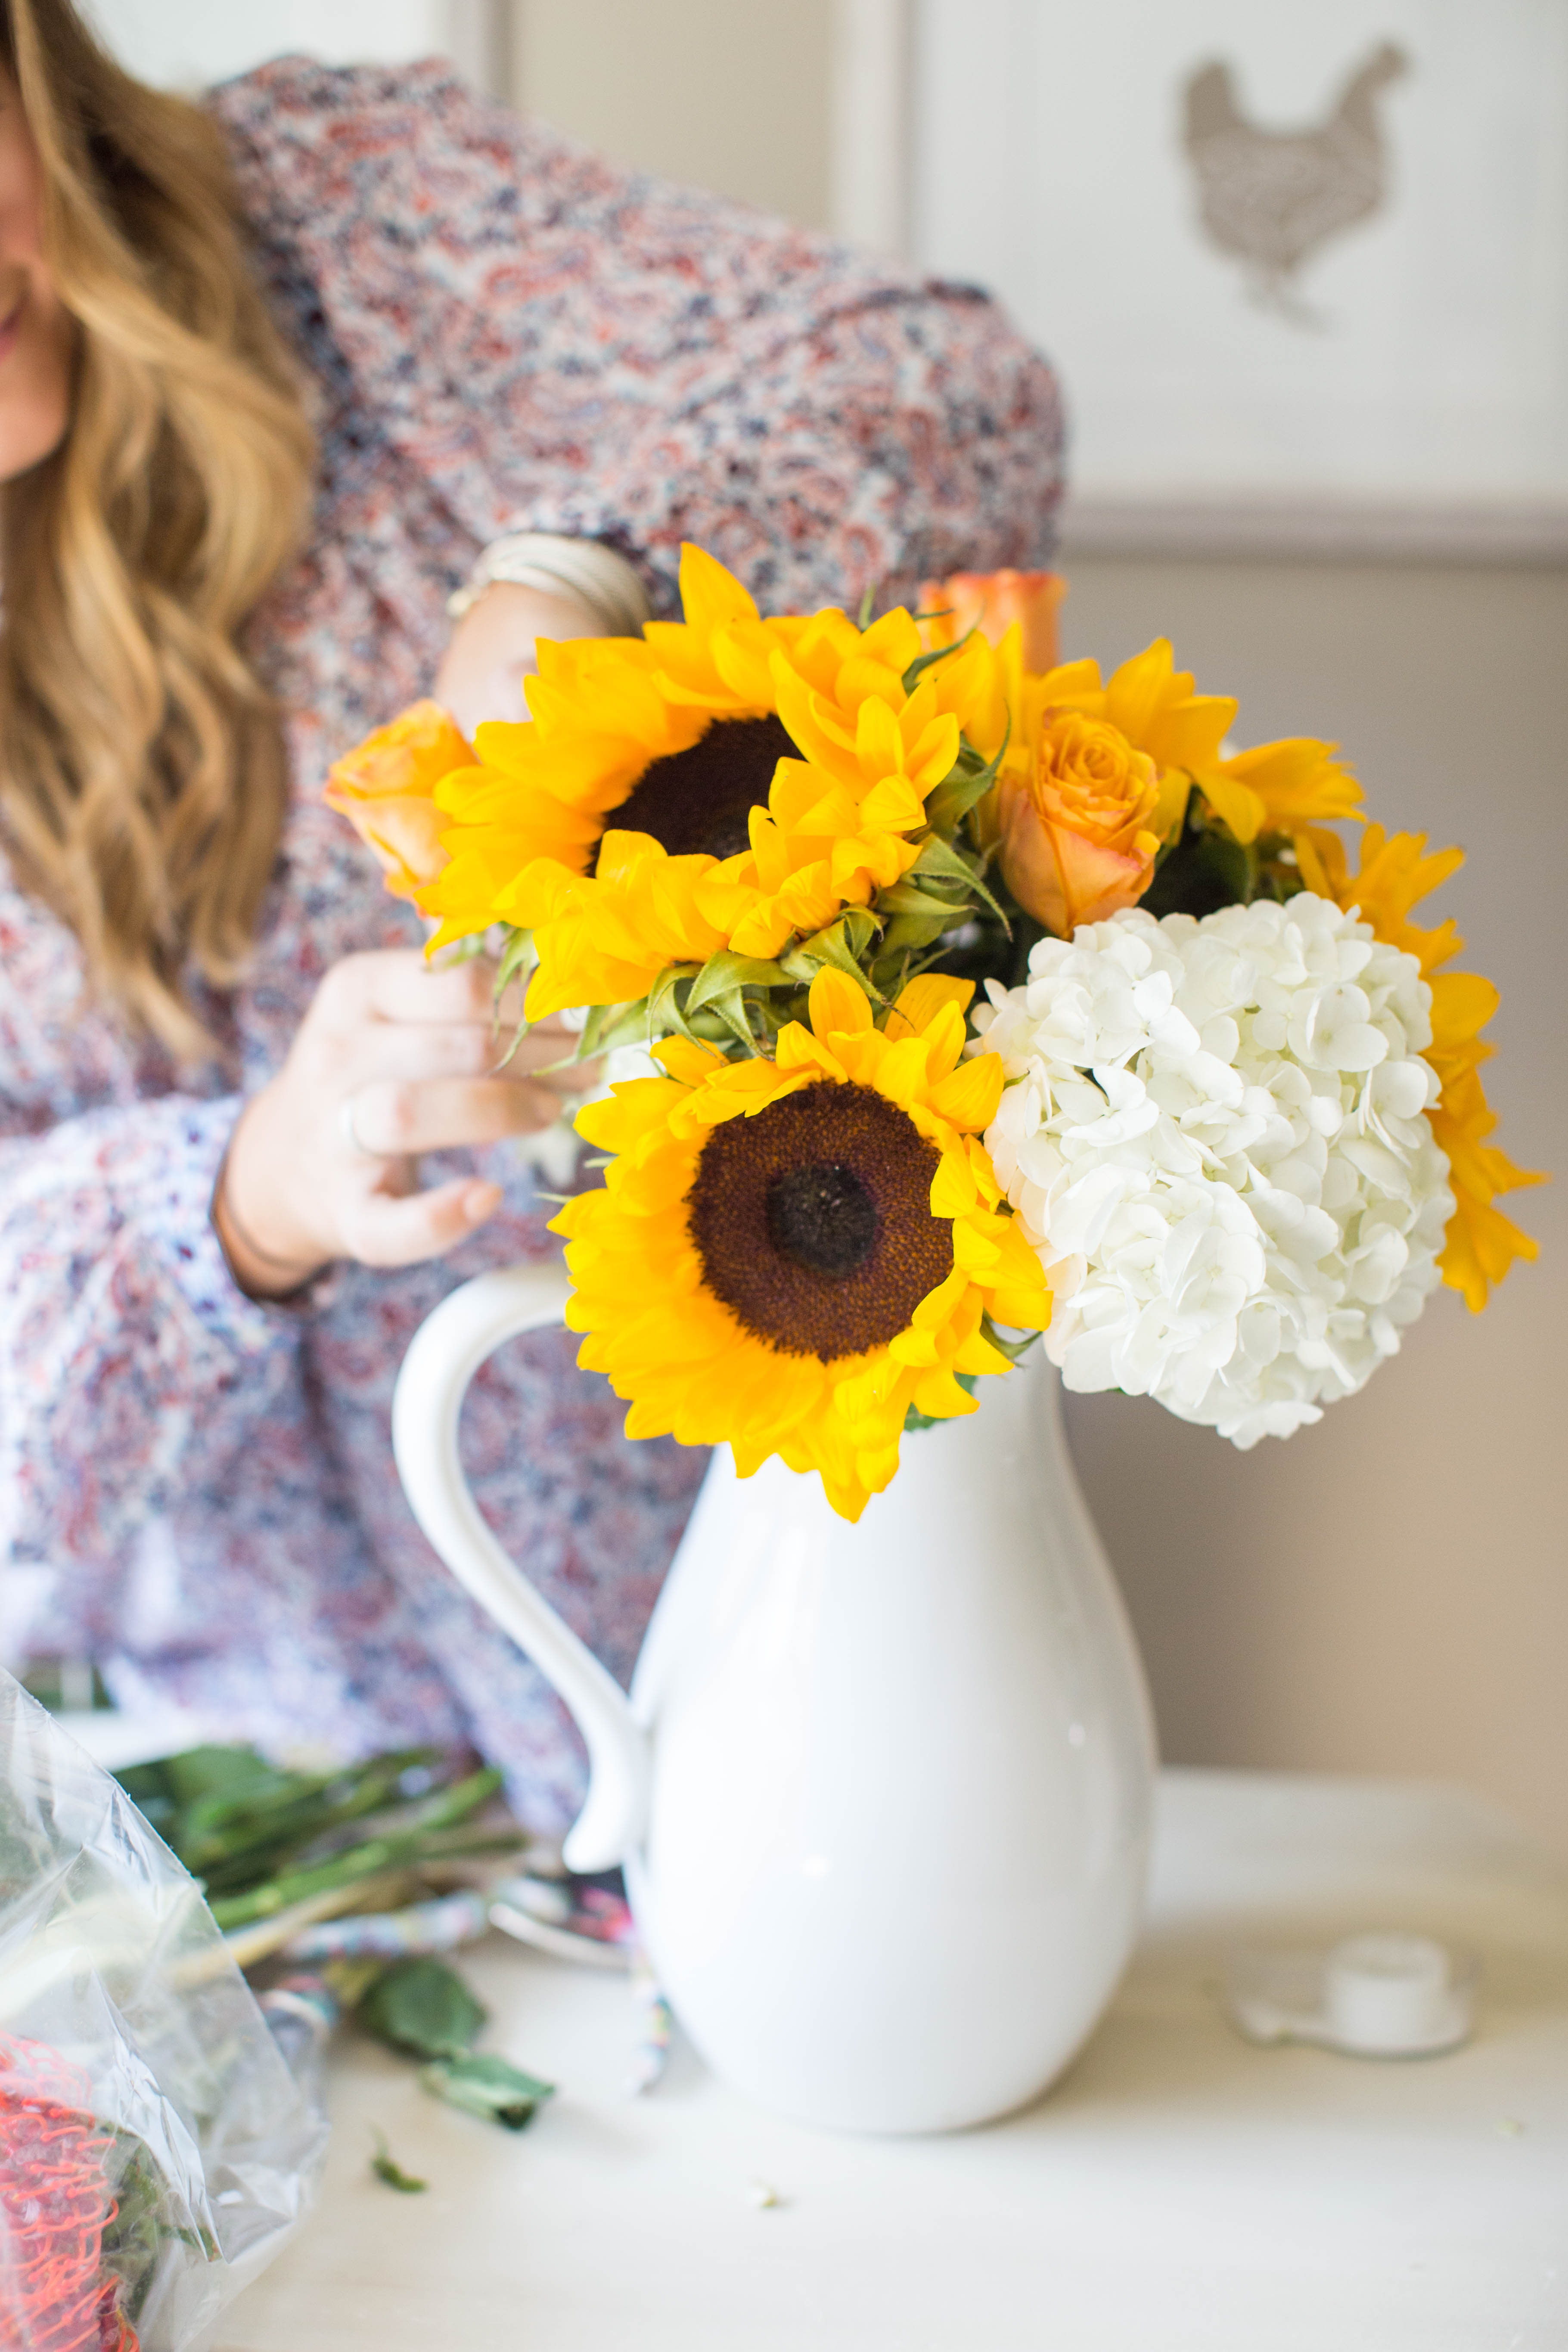 How to Make a Fall Floral Arrangement by North Carolina style blogger Coffee Beans & Bobby Pins